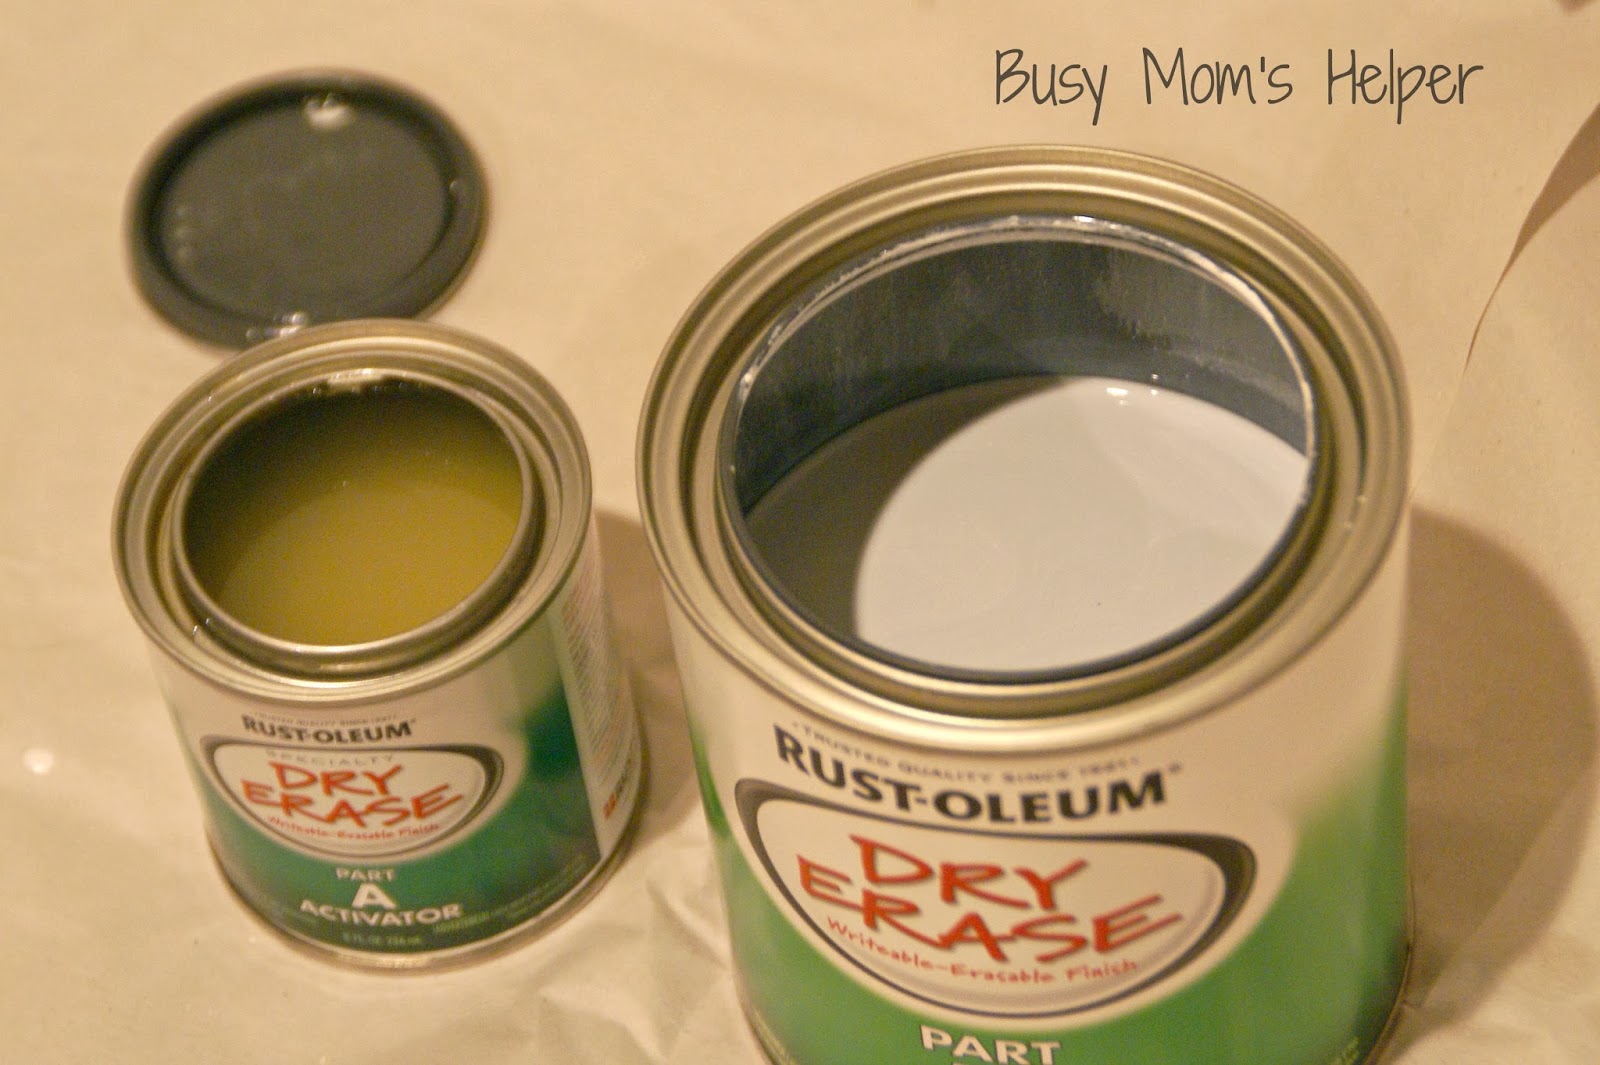 Dry Erase Paint Does it Work? TWO Projects! Busy Moms